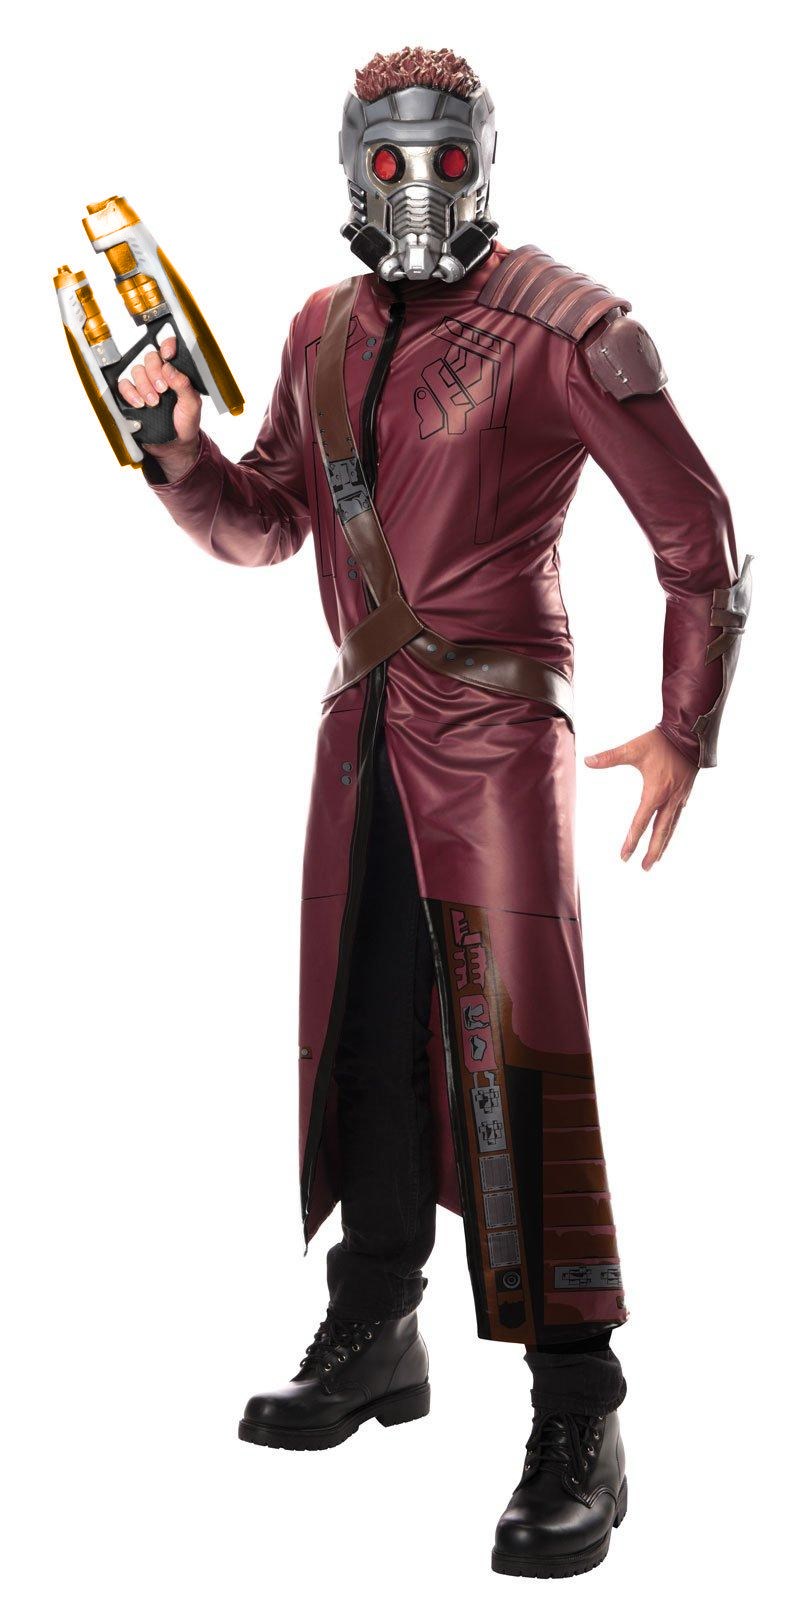 Guardians of the Galaxy - Deluxe Adult Star-Lord